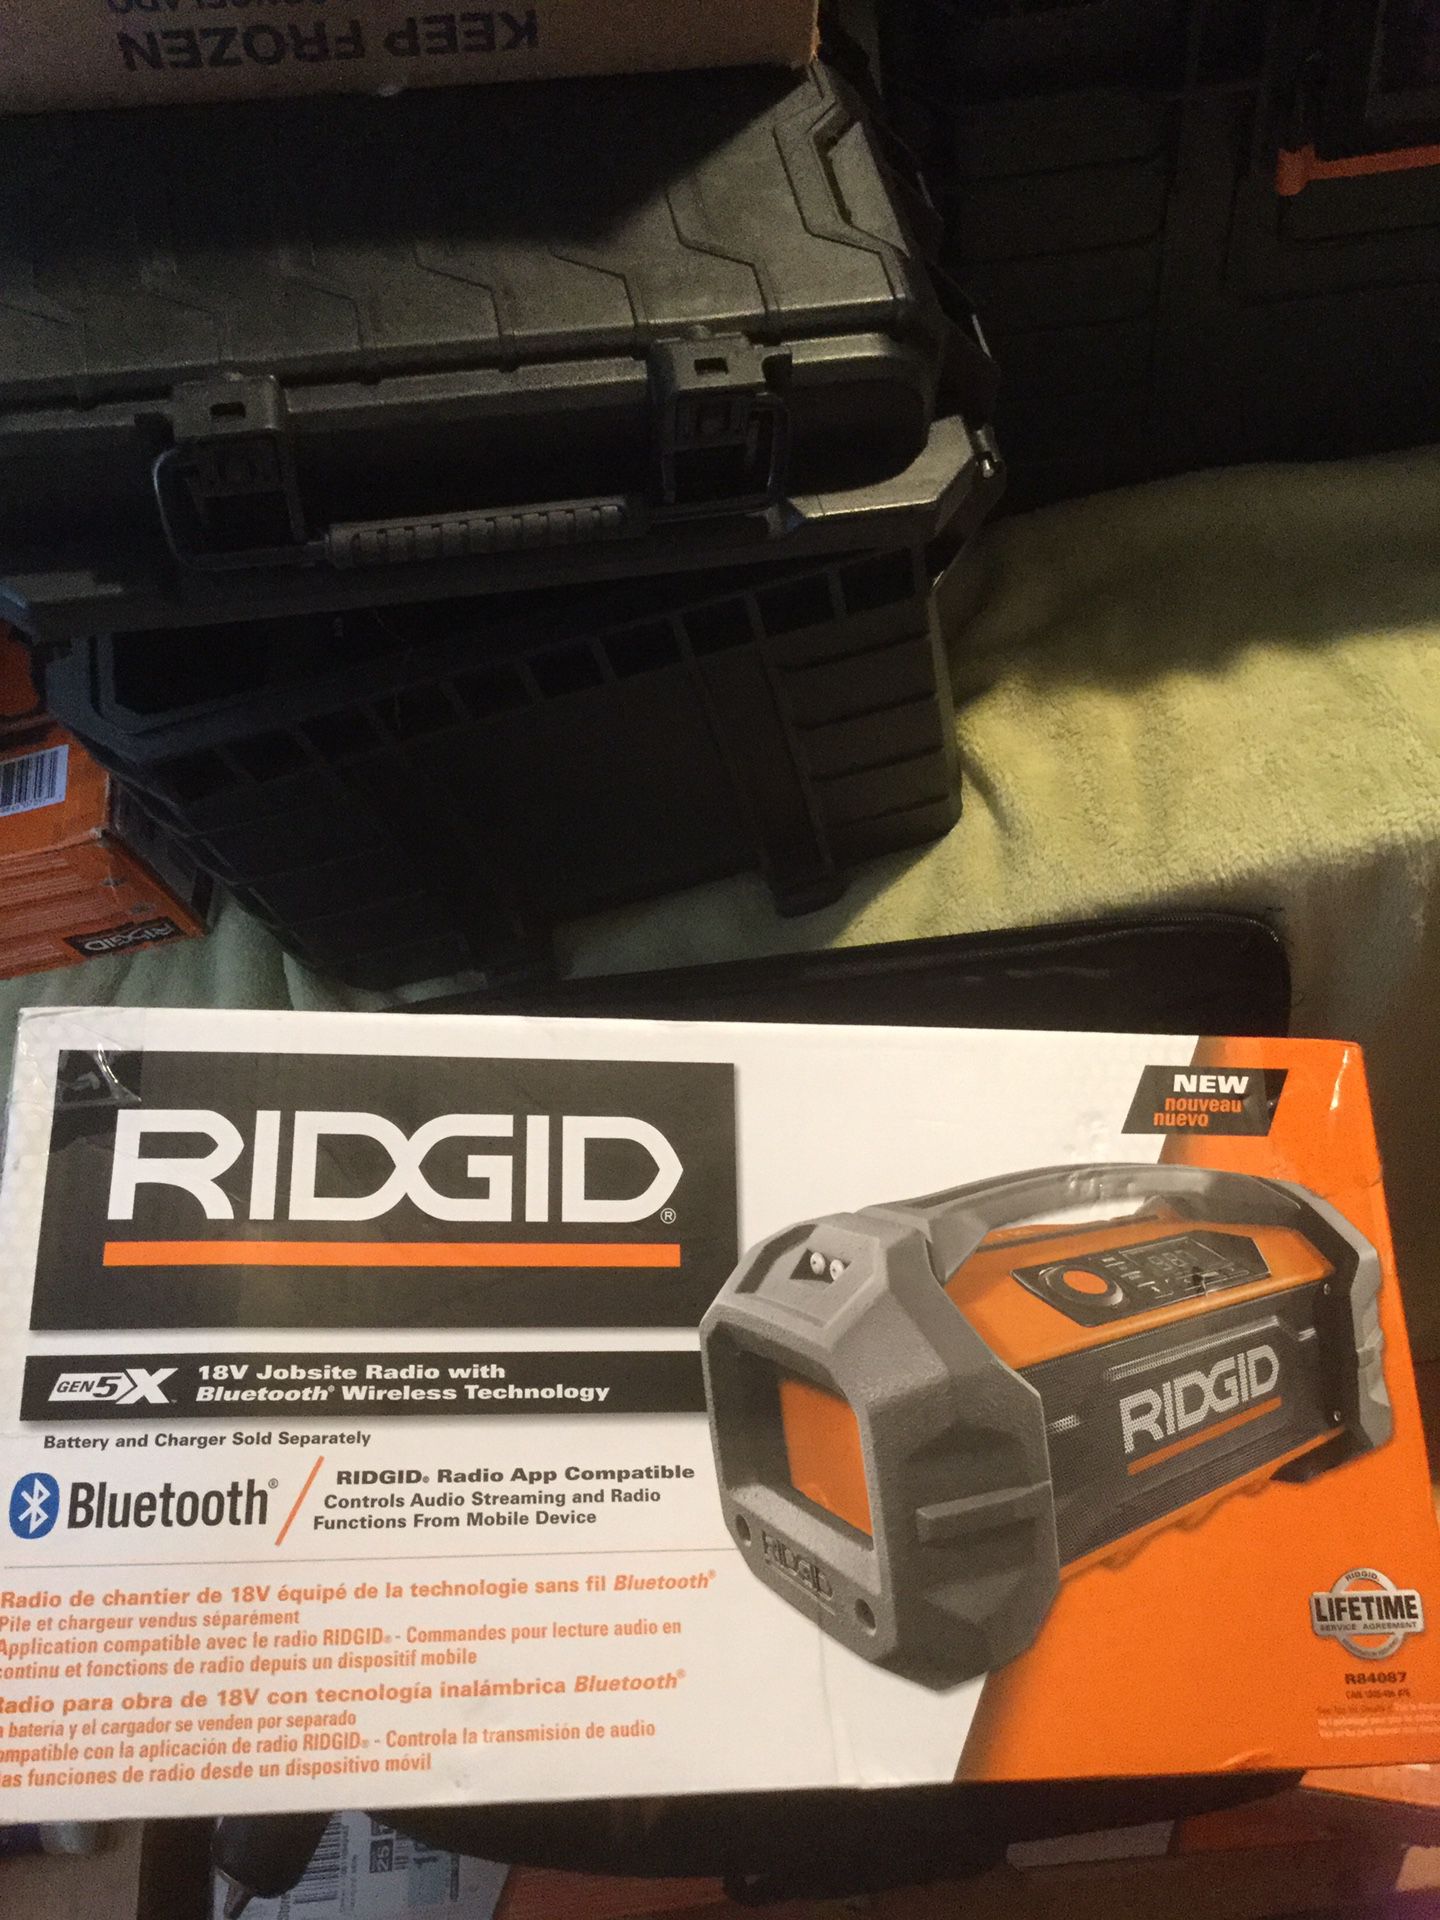 Ridgid Generation 5x Bluetooth play your own Music on the Job site Radio Brand new never opened